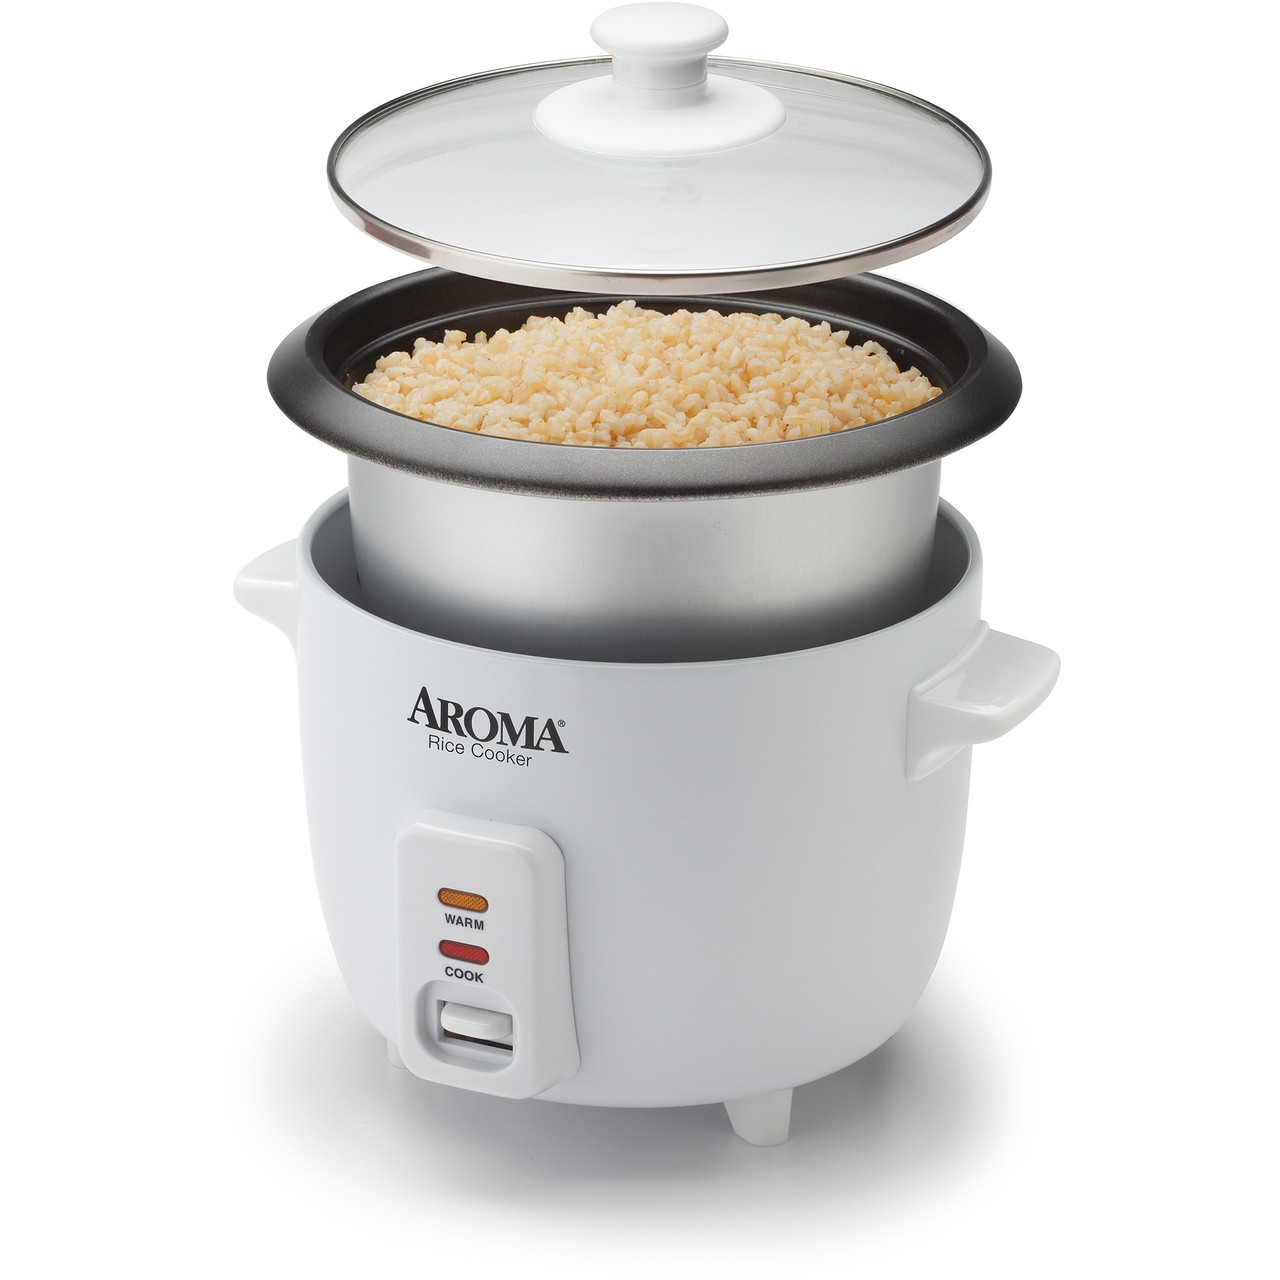 Aroma Housewares Aroma 6-cup Cooked 1.5Qt. One Touch Rice Cooker